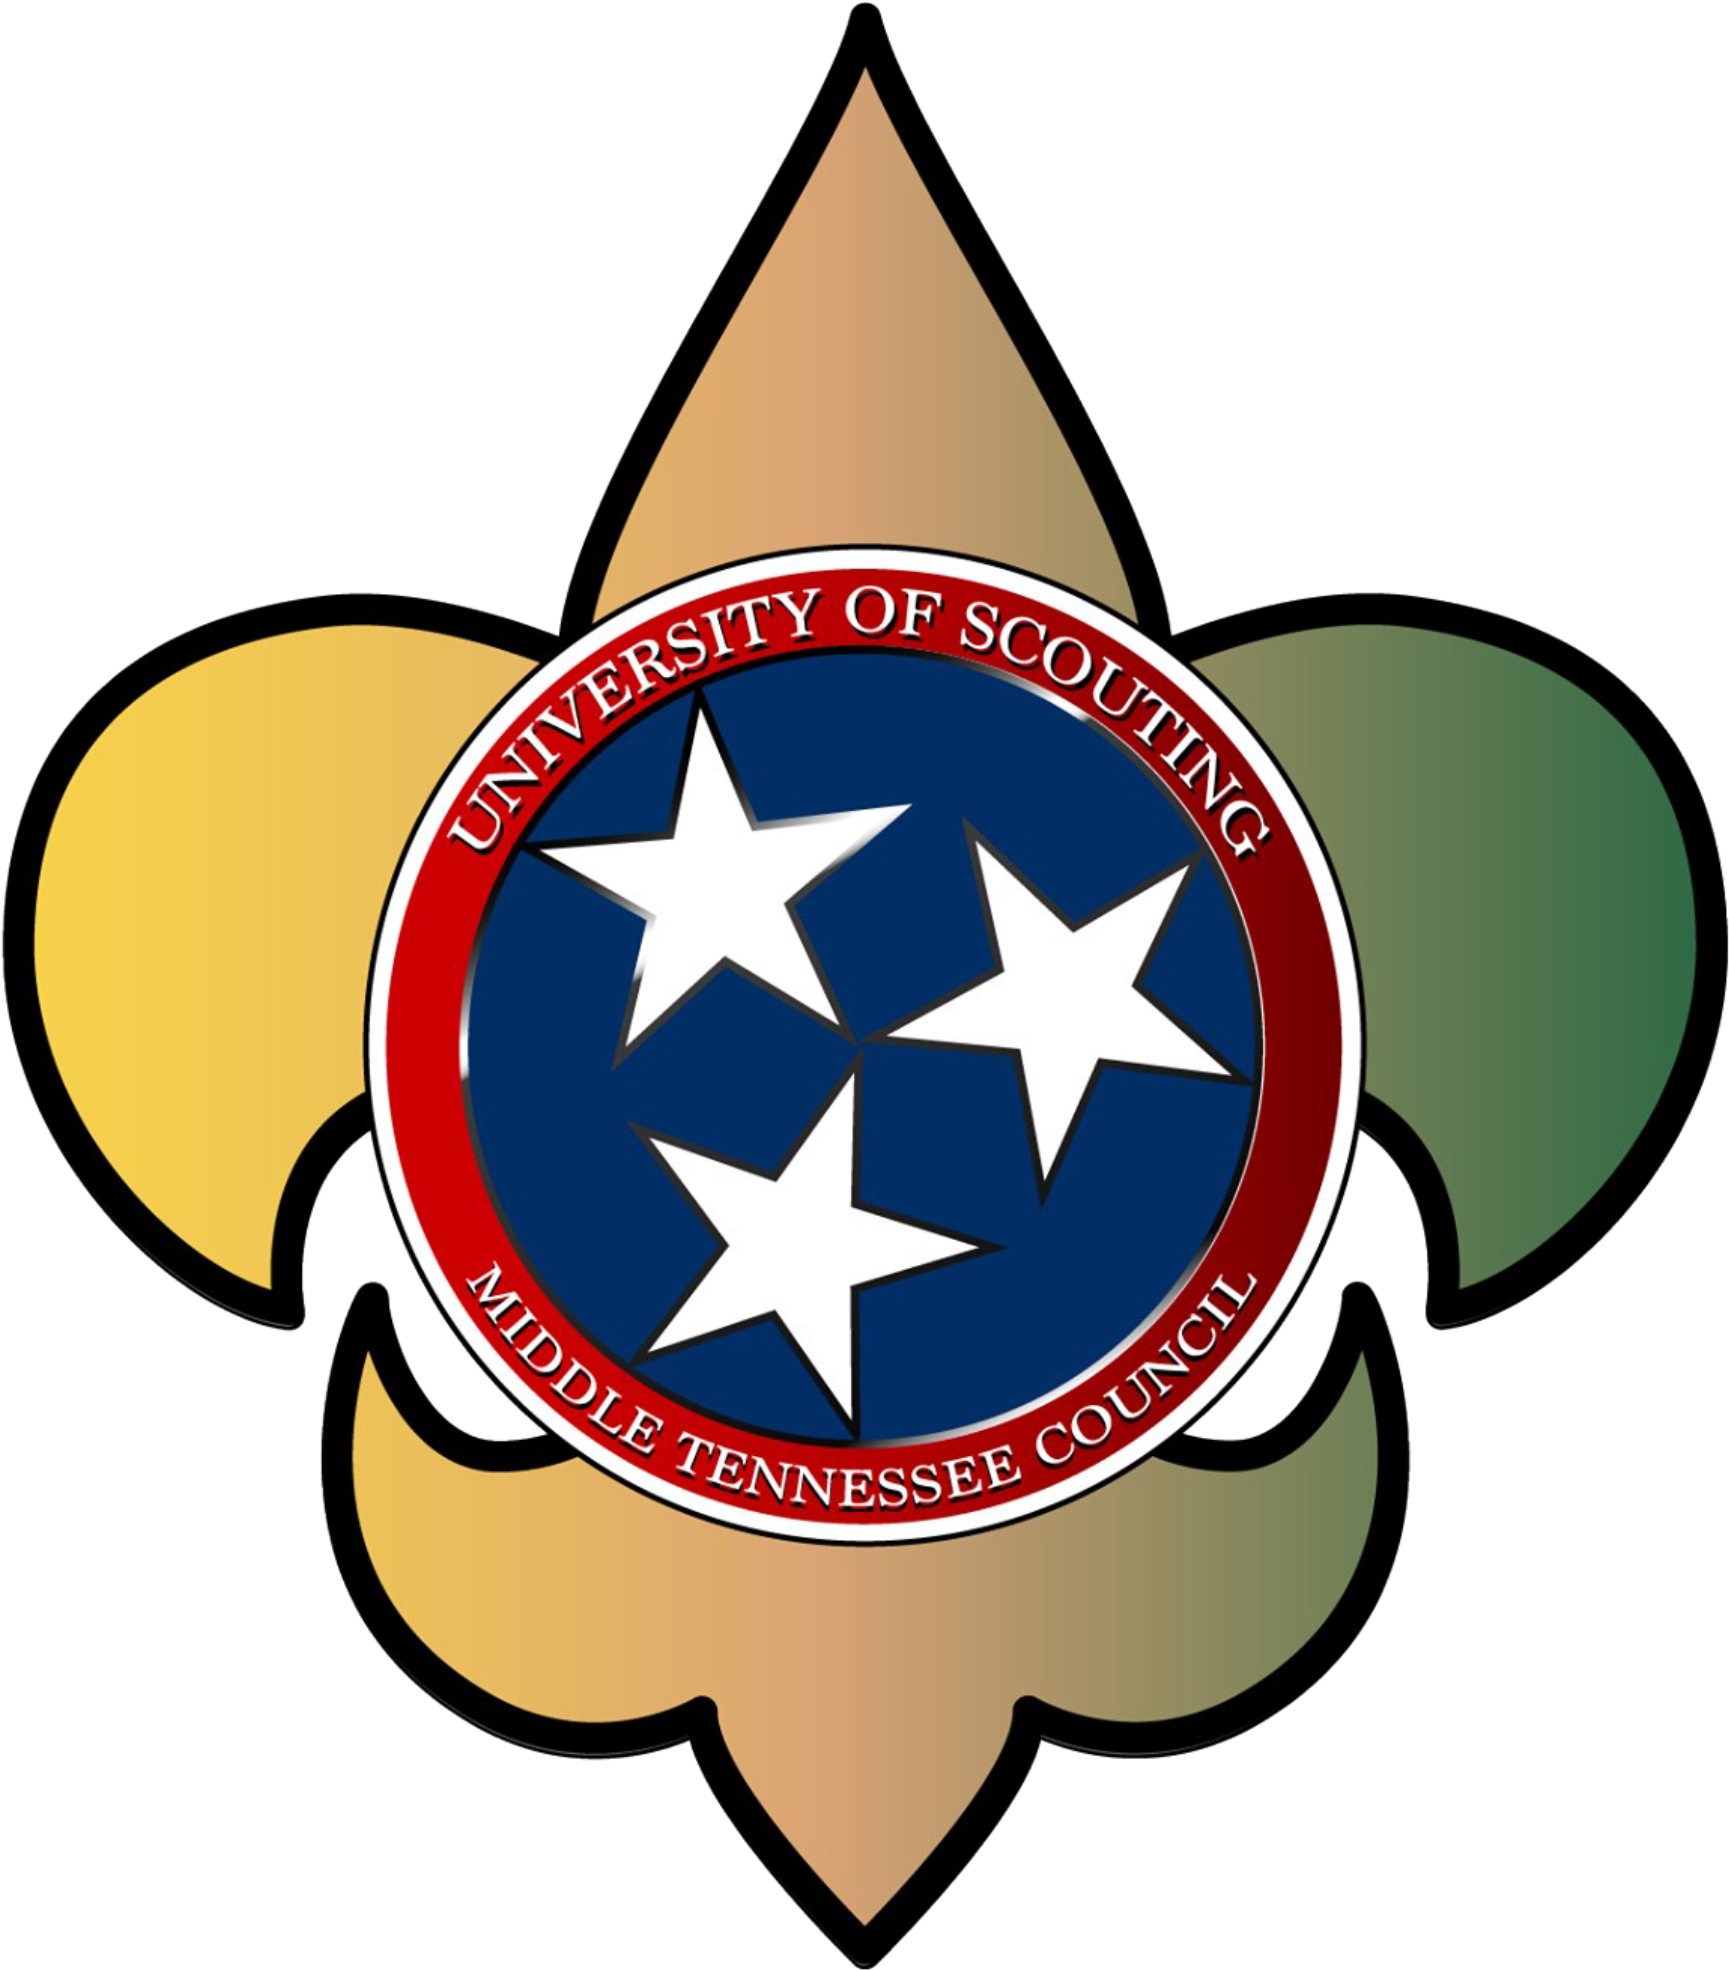 The Middle Tennessee Council Prides Itself On Offering - Tennessee Tri Star Logo (1766x1999)